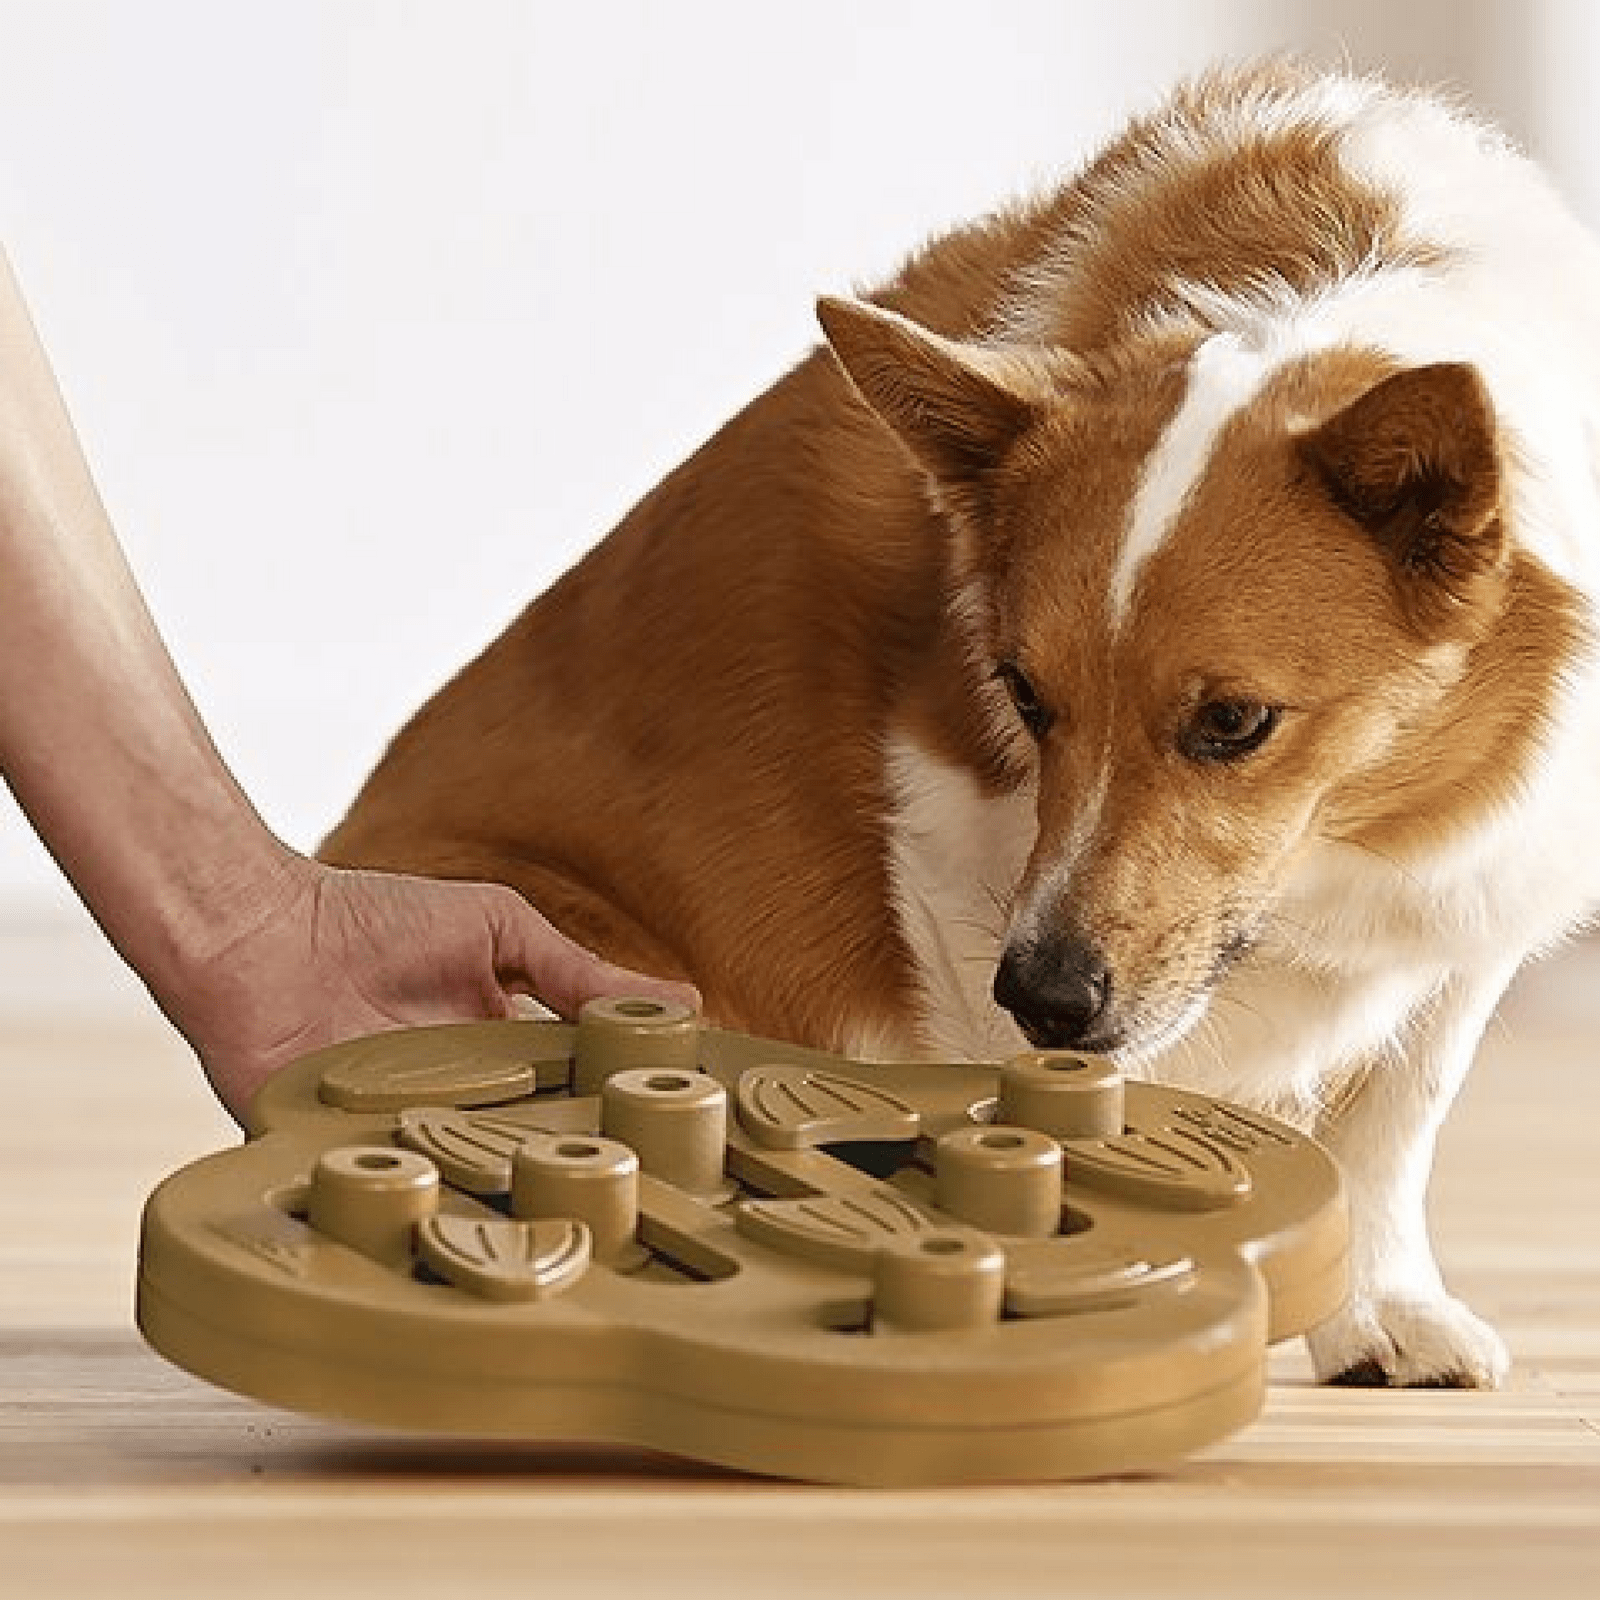 DOG SMART - COMPOSITE - Nina Ottosson Treat Puzzle Games for Dogs